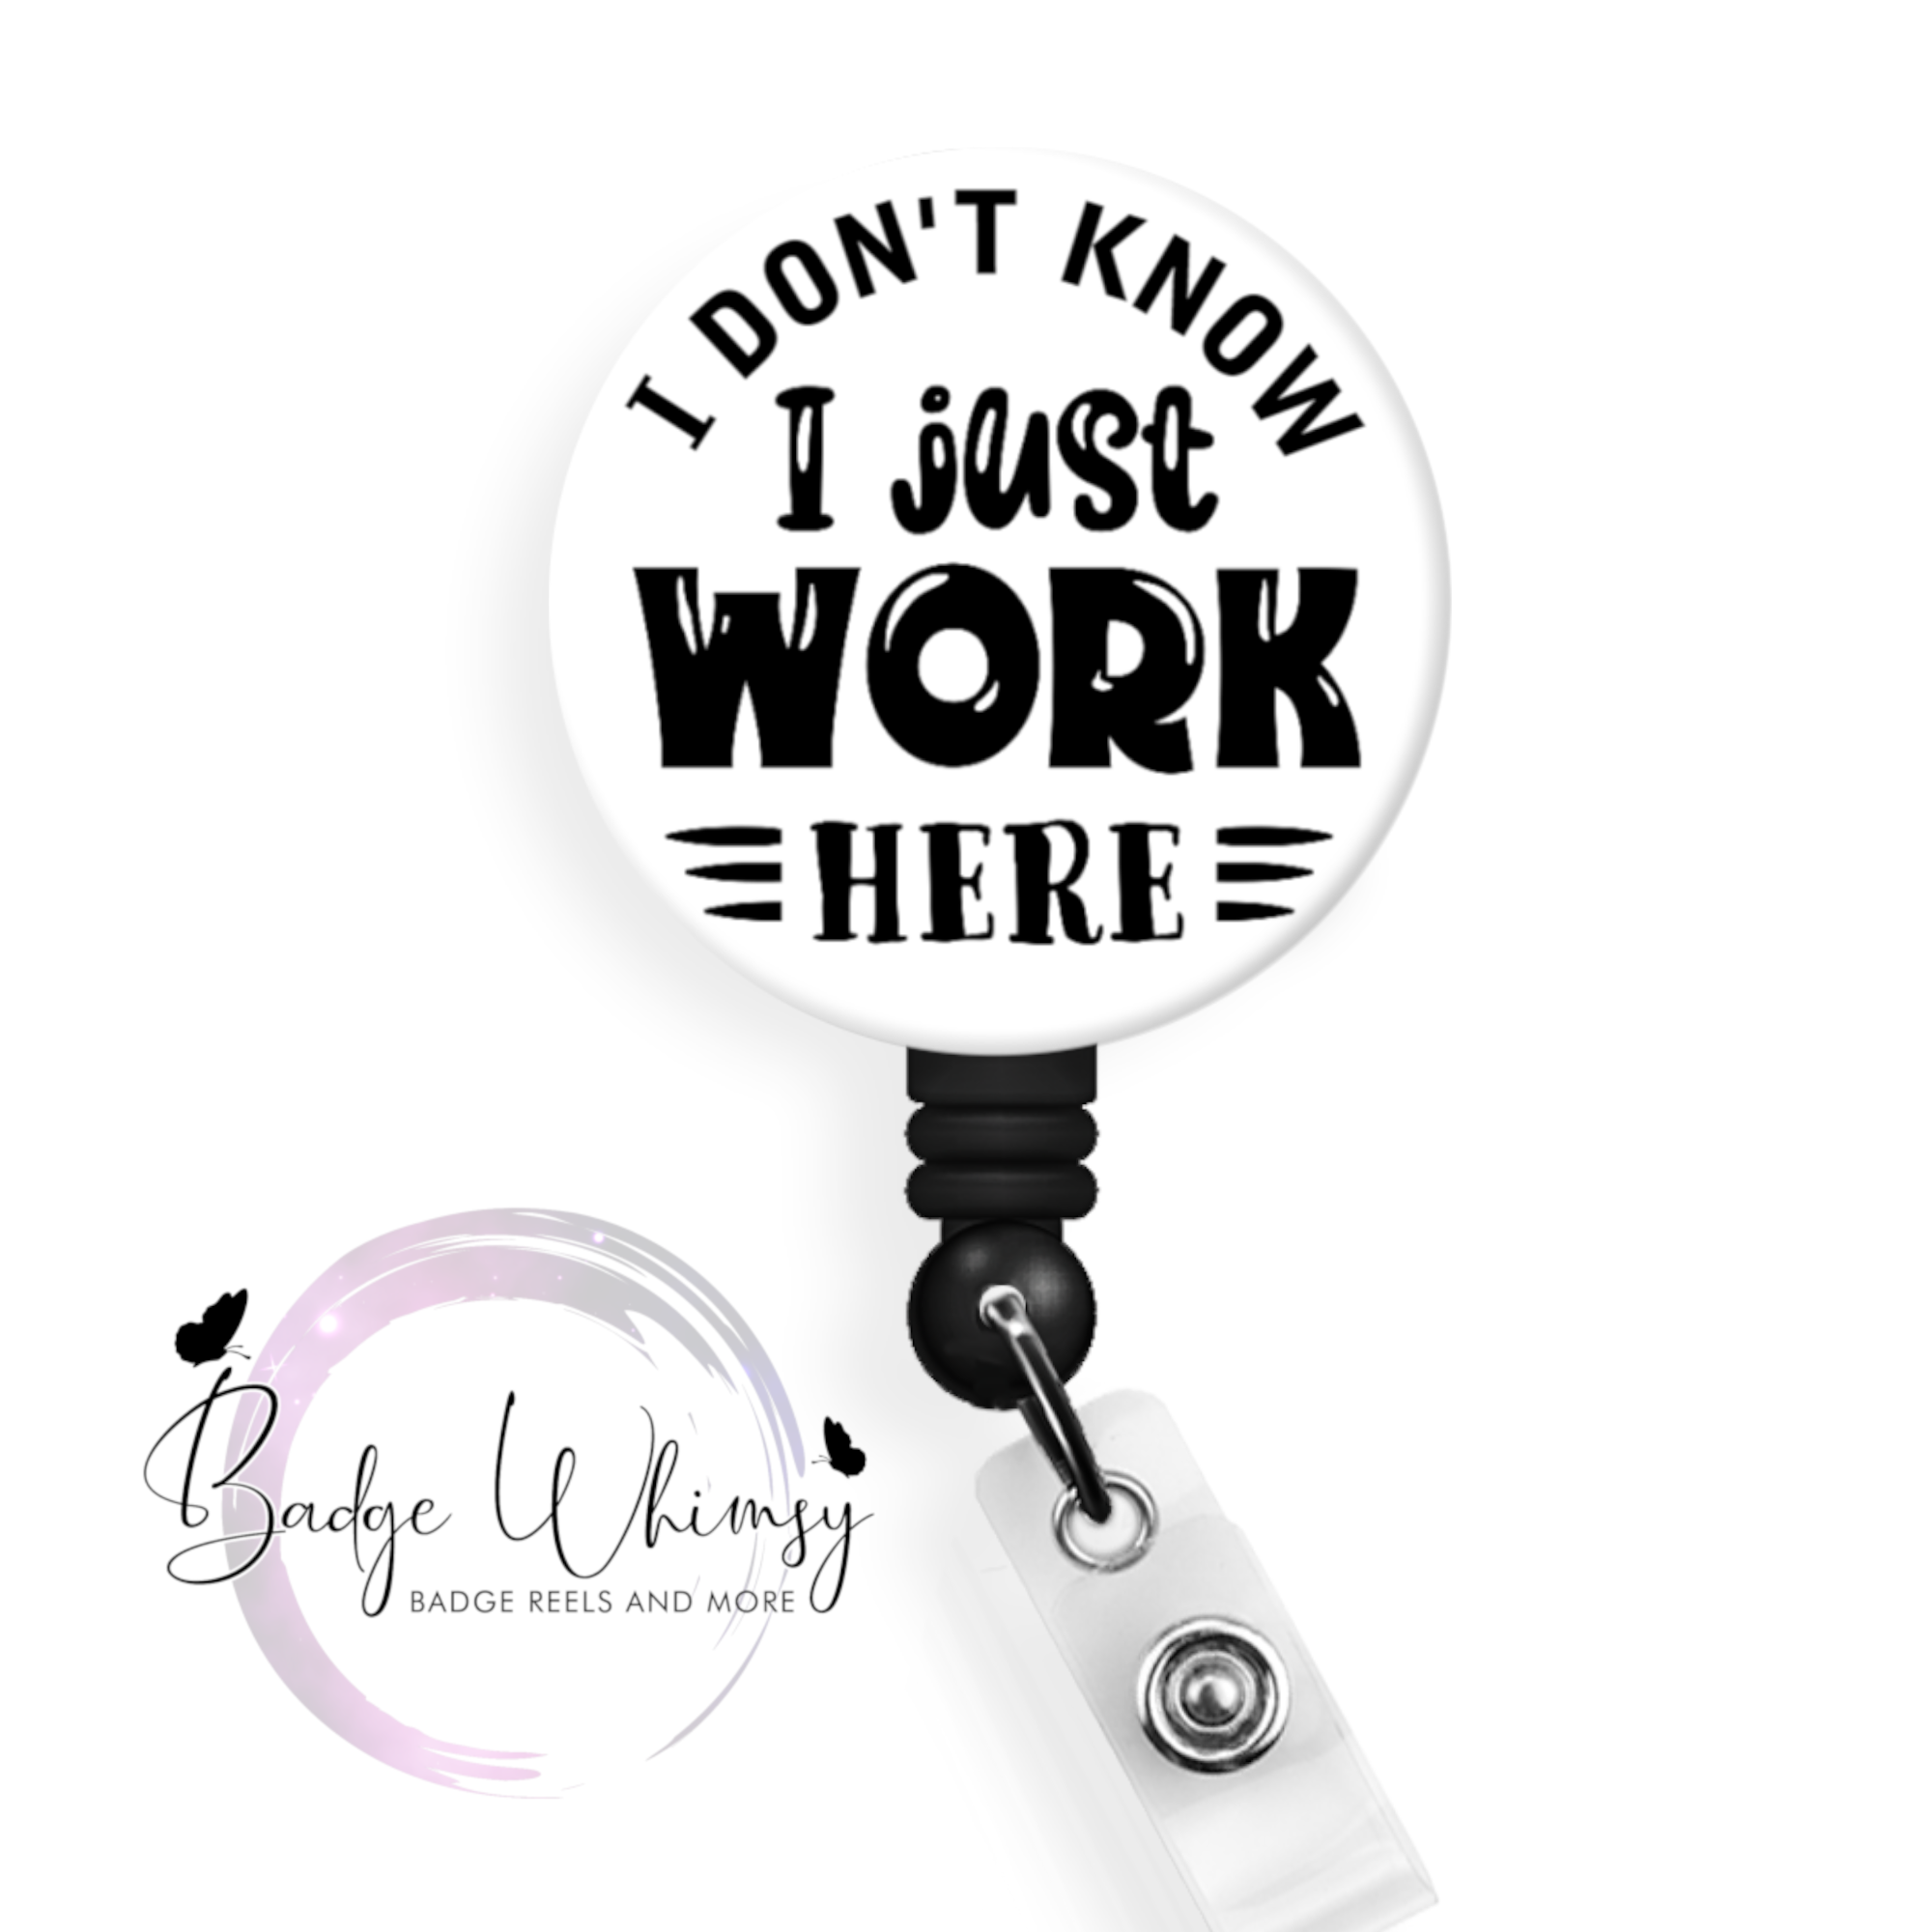 I Don't Know - I Just Work Here - Pin, Magnet or Badge Holder